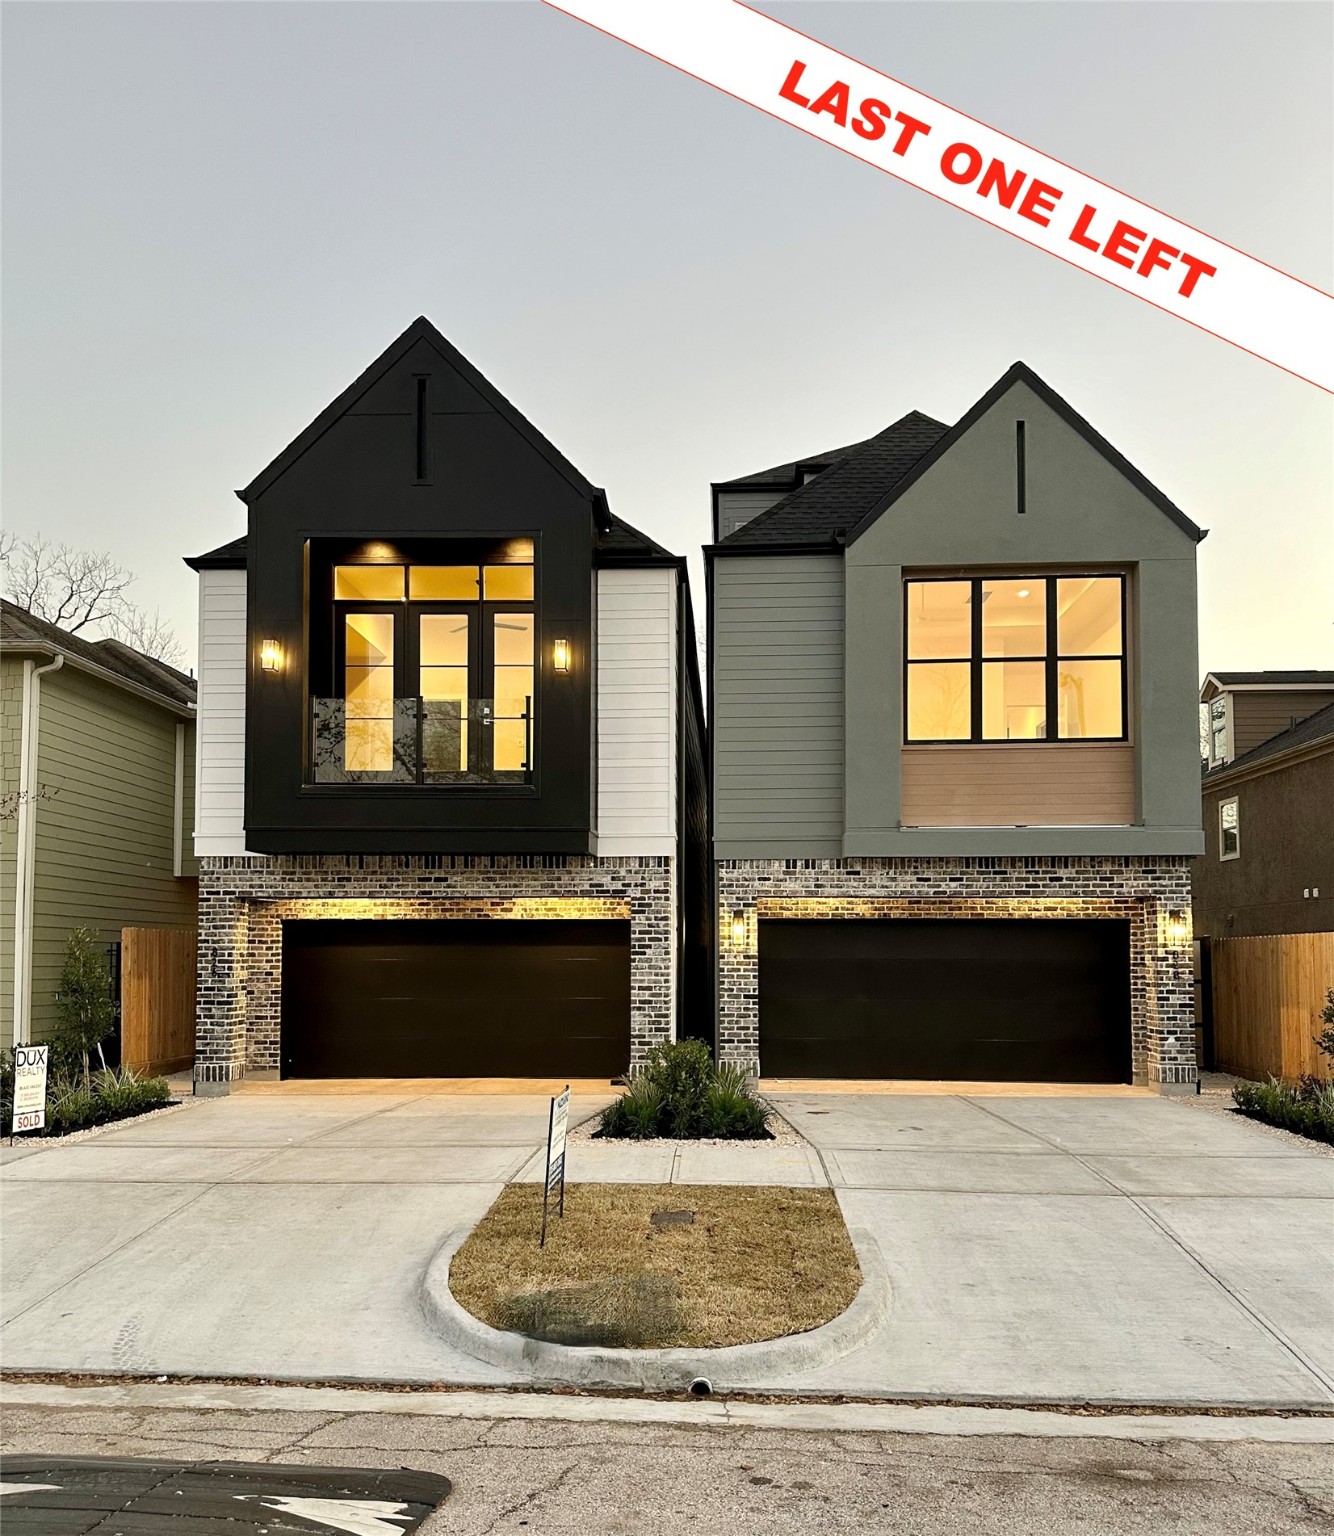 MCD is one of Houston’s premier home builders in well established inner loop neighborhoods in the city. This residence will feature all of the high end finishes you’ve come to expect from MCD. A balance of luxury & modern day living. This new luxury home features 1st floor living, flex & game room, private driveway & approx 1125 backyard. Finishes include quartz/granite counters, Fisher Paykel appliances, a luxurious built-in primary closet, engineered wood floors, & energy efficient.